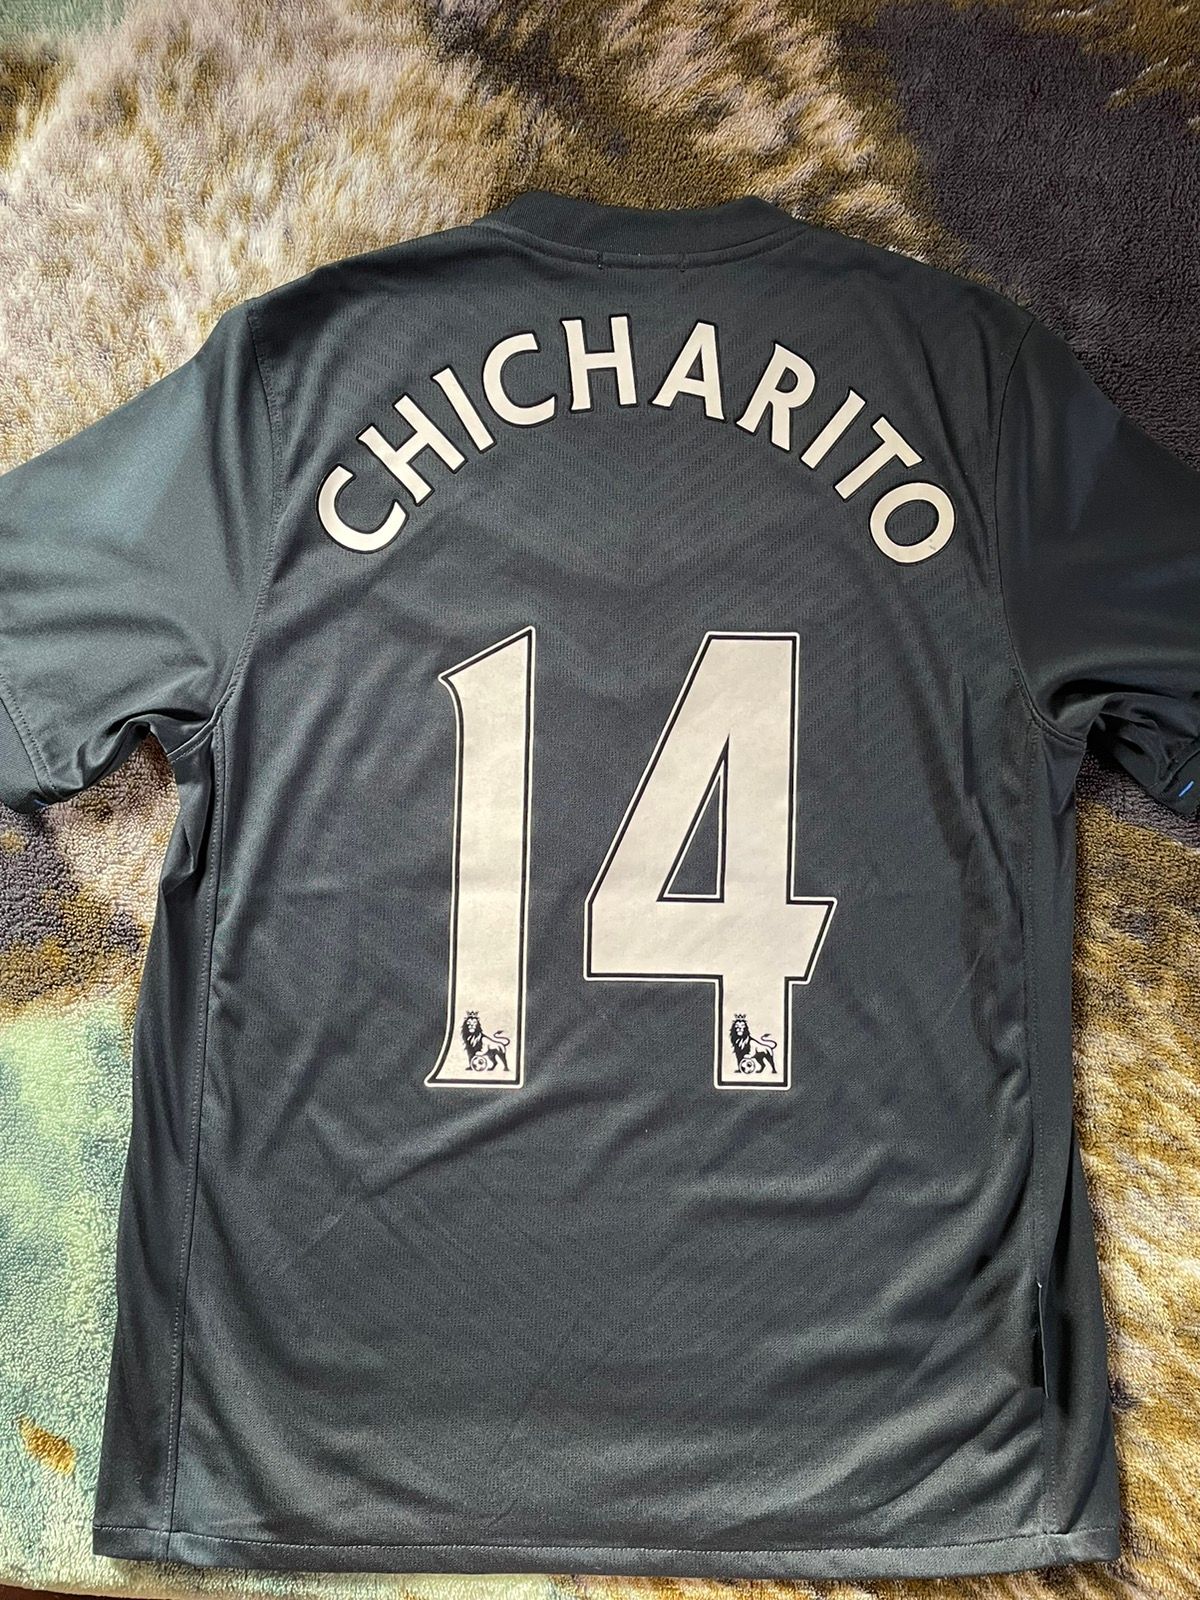 Nike 2009 NIKE MANCHESTER UNITED AIG CHICHARITO SOCCER JERSEY Size US M / EU 48-50 / 2 - 1 Preview